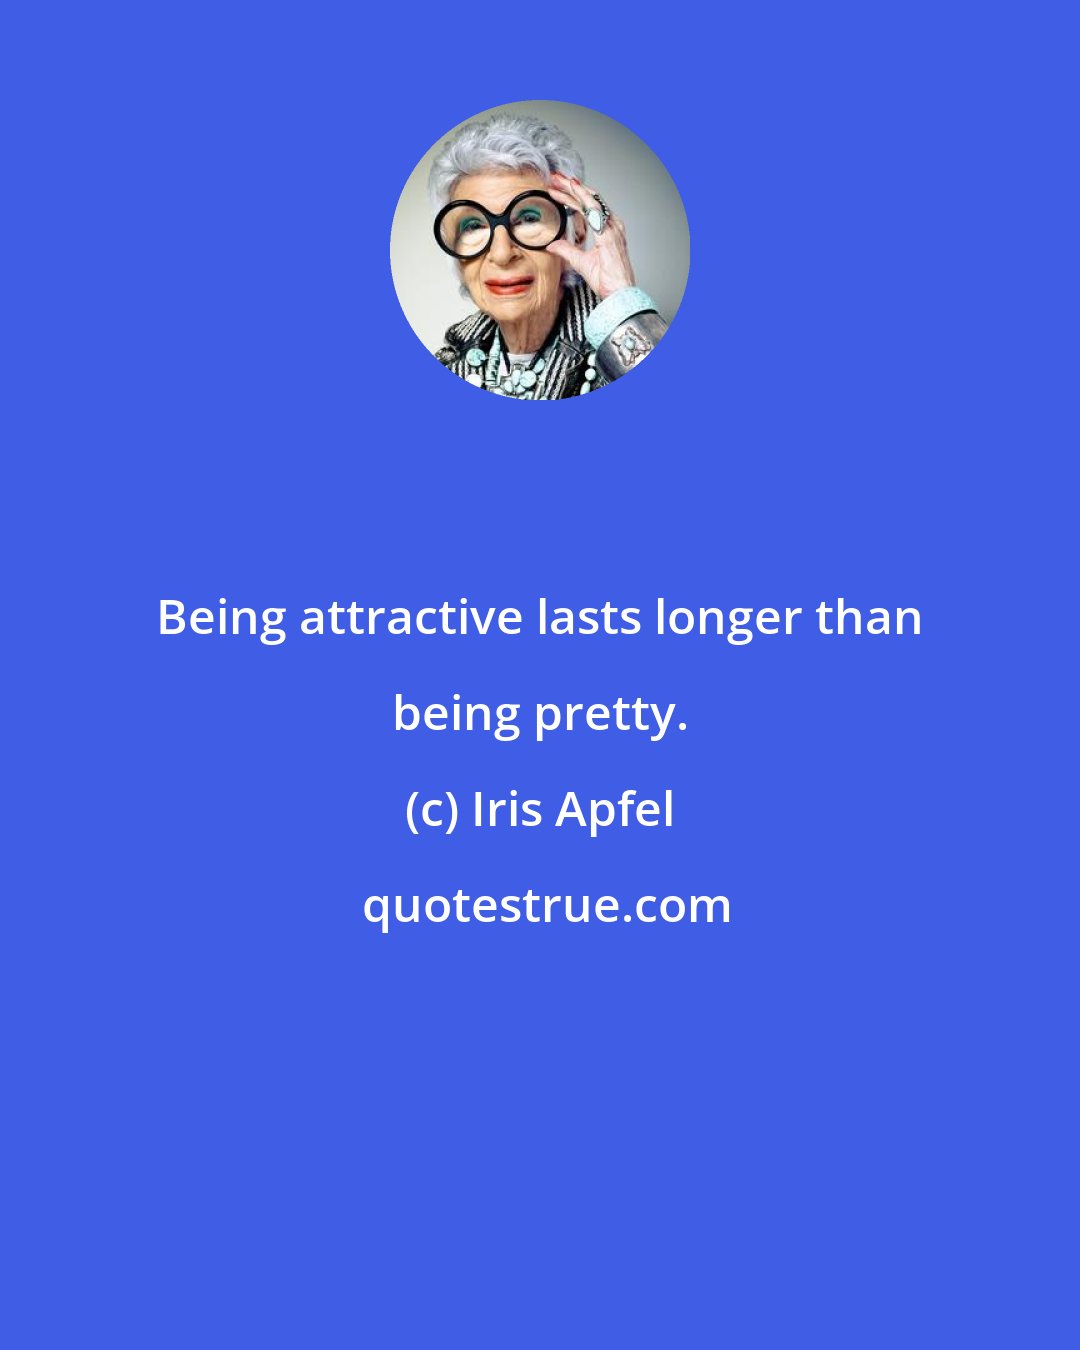 Iris Apfel: Being attractive lasts longer than being pretty.